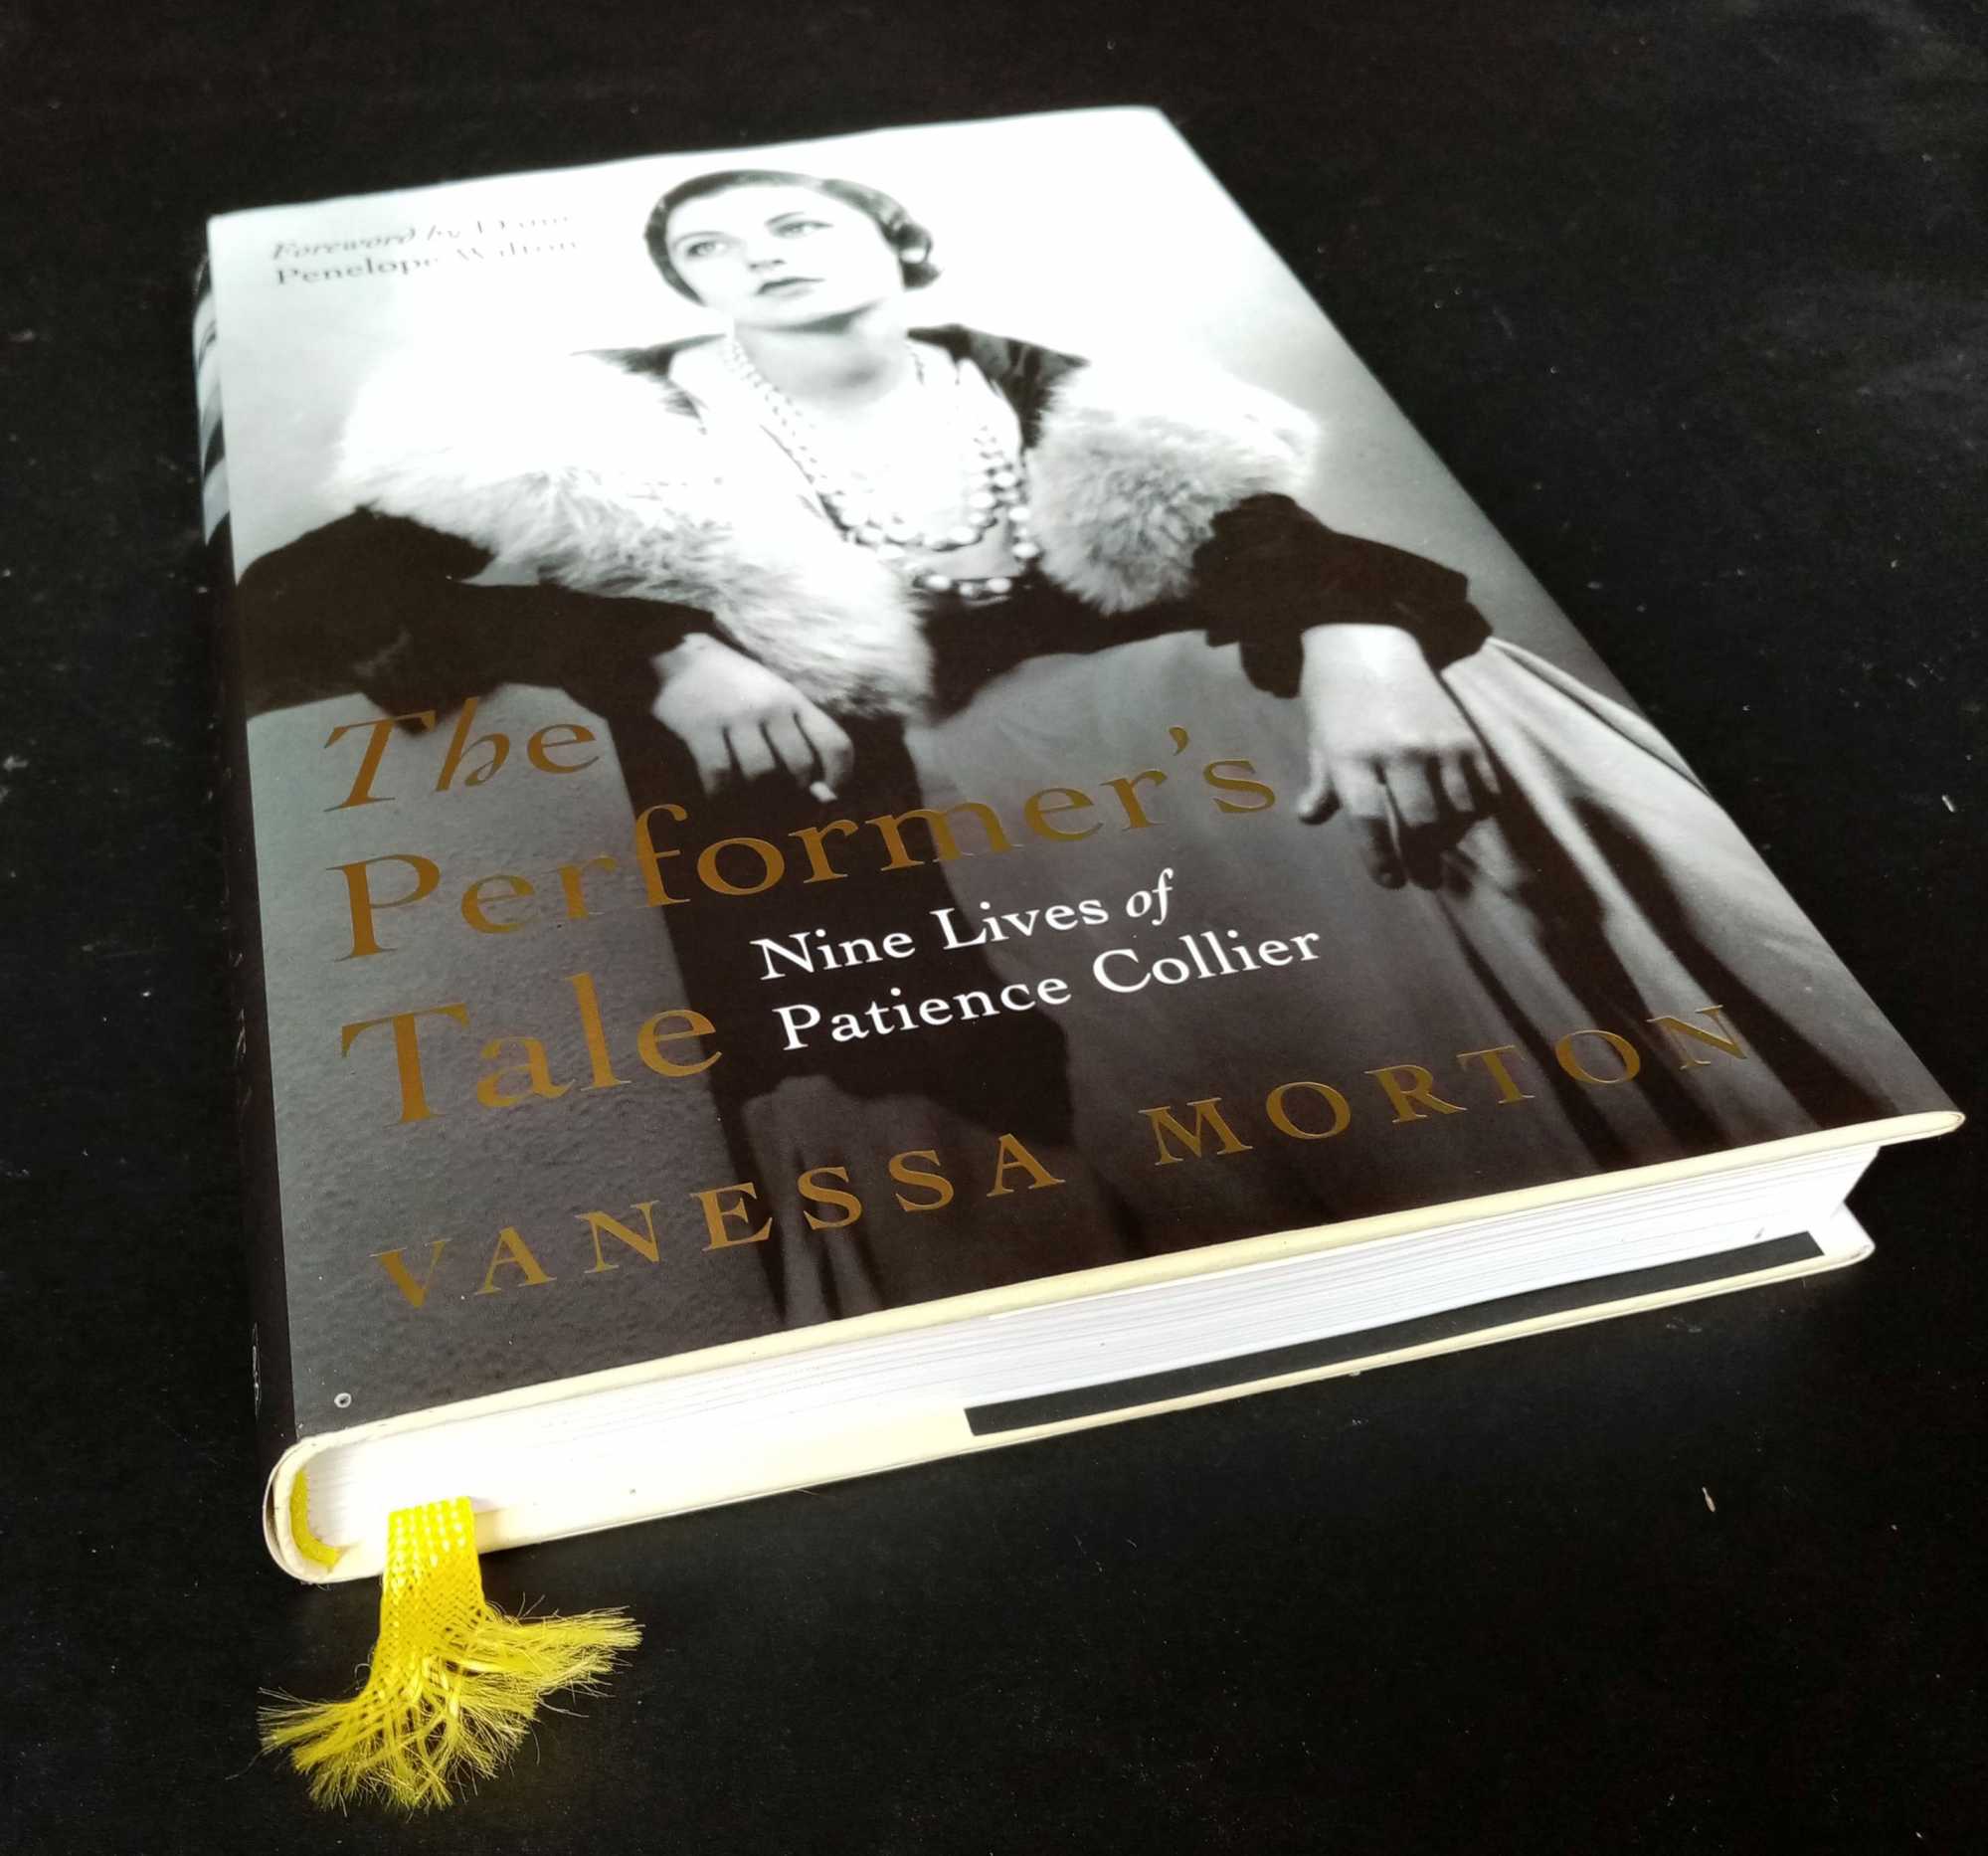 Vanessa Morton - The Performer's Tale: The Nine Lives of Patience Collier